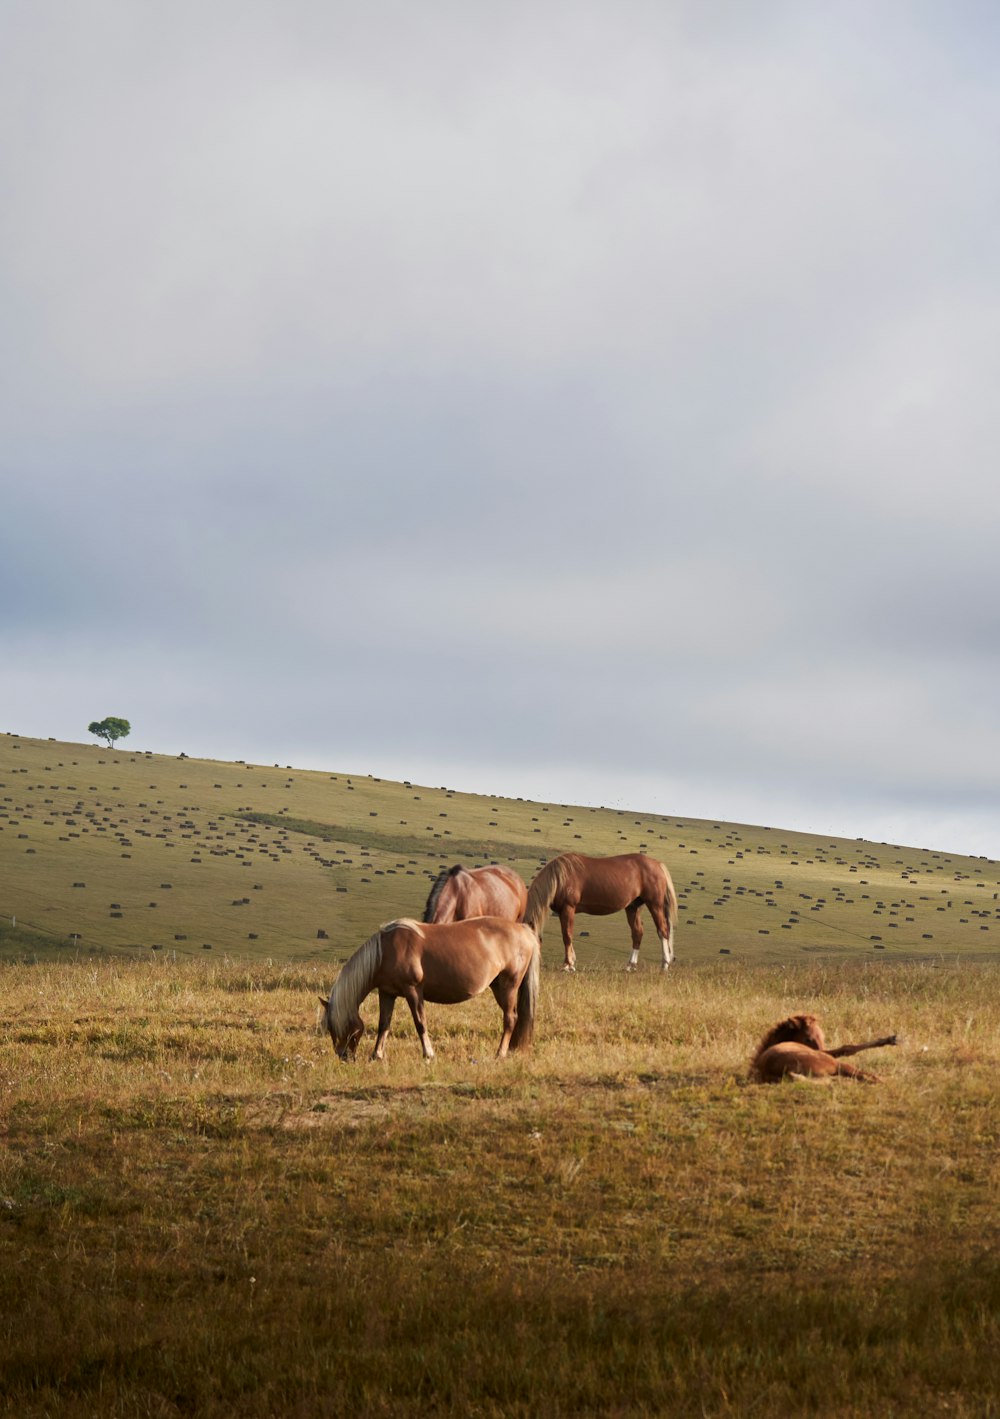 three horses graze in a grassy field on a cloudy day